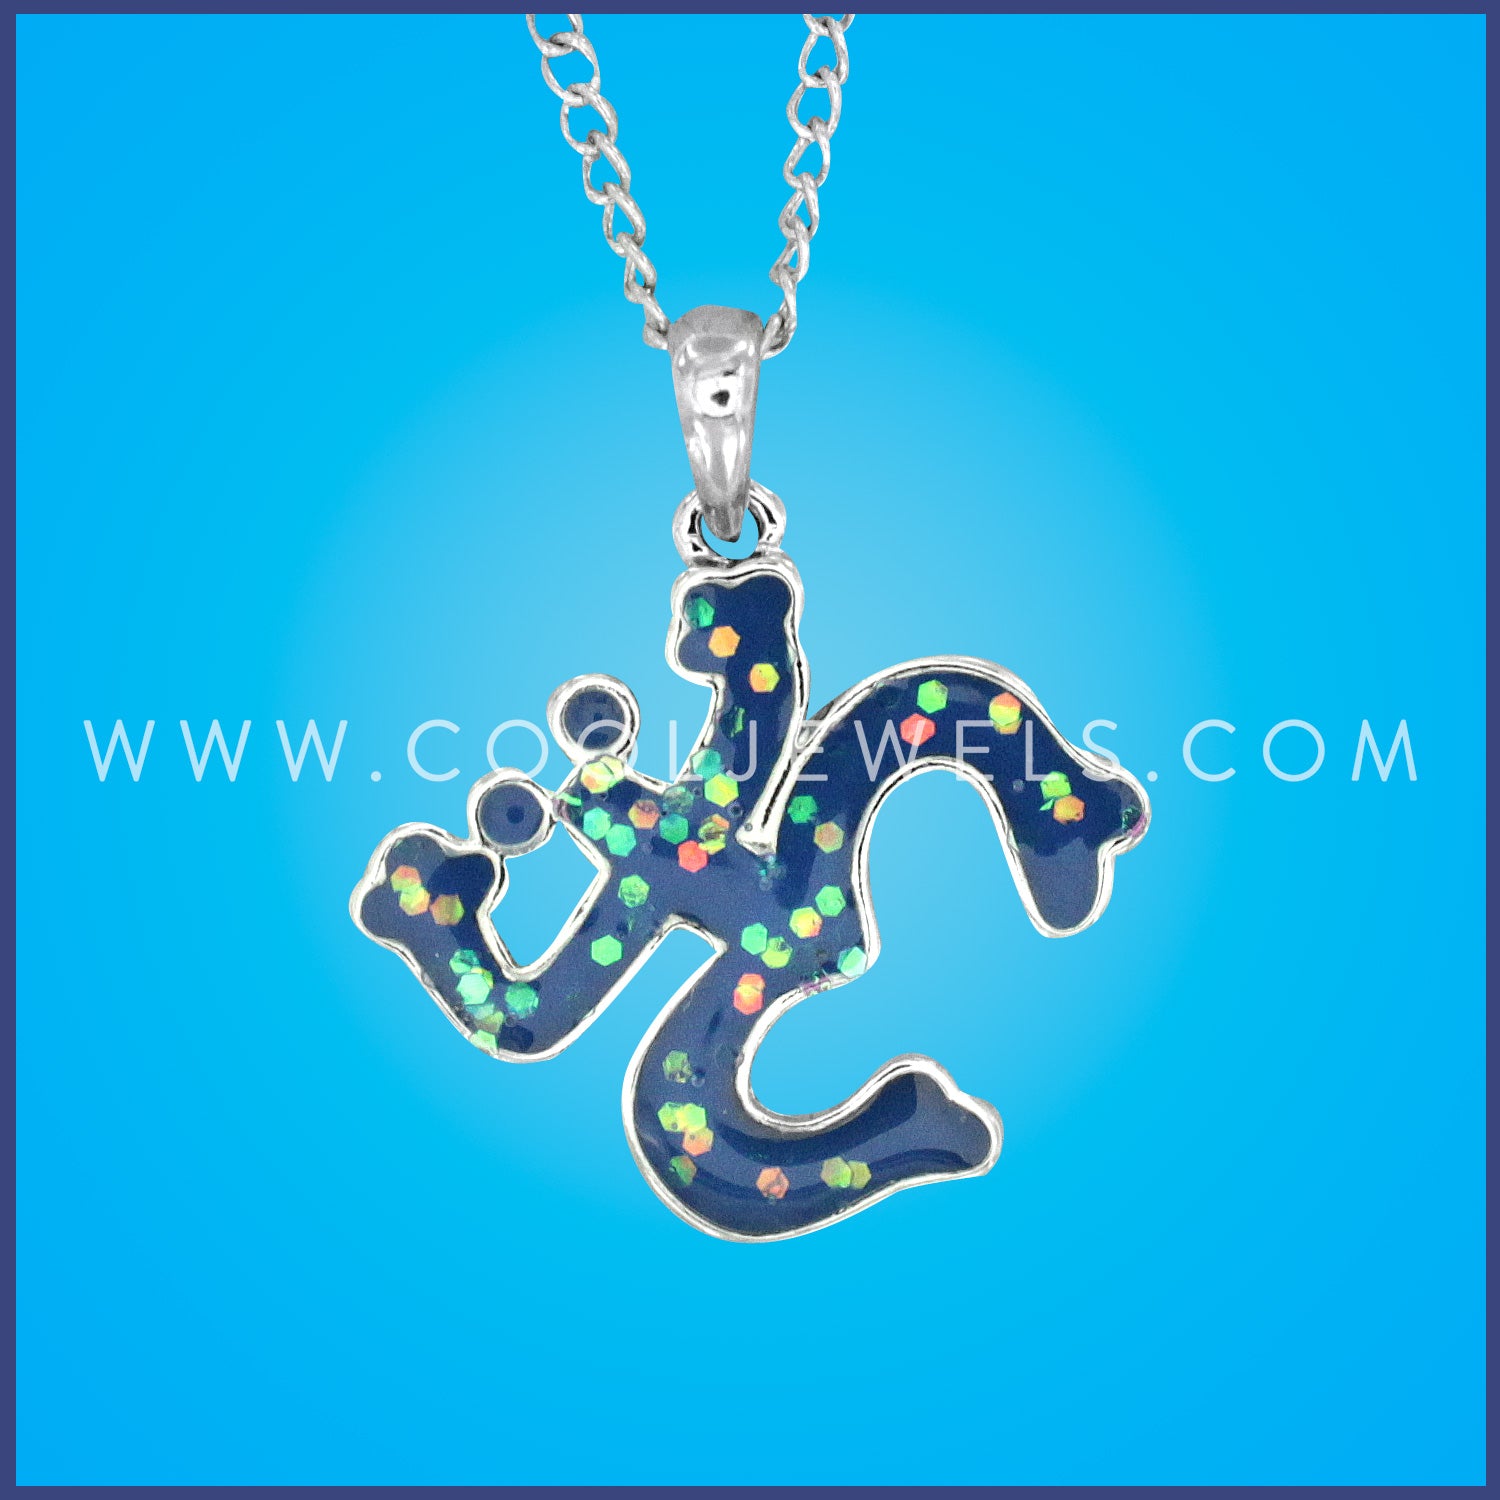 LINK CHAIN NECKLACE WITH COQUI TAINO PENDANT